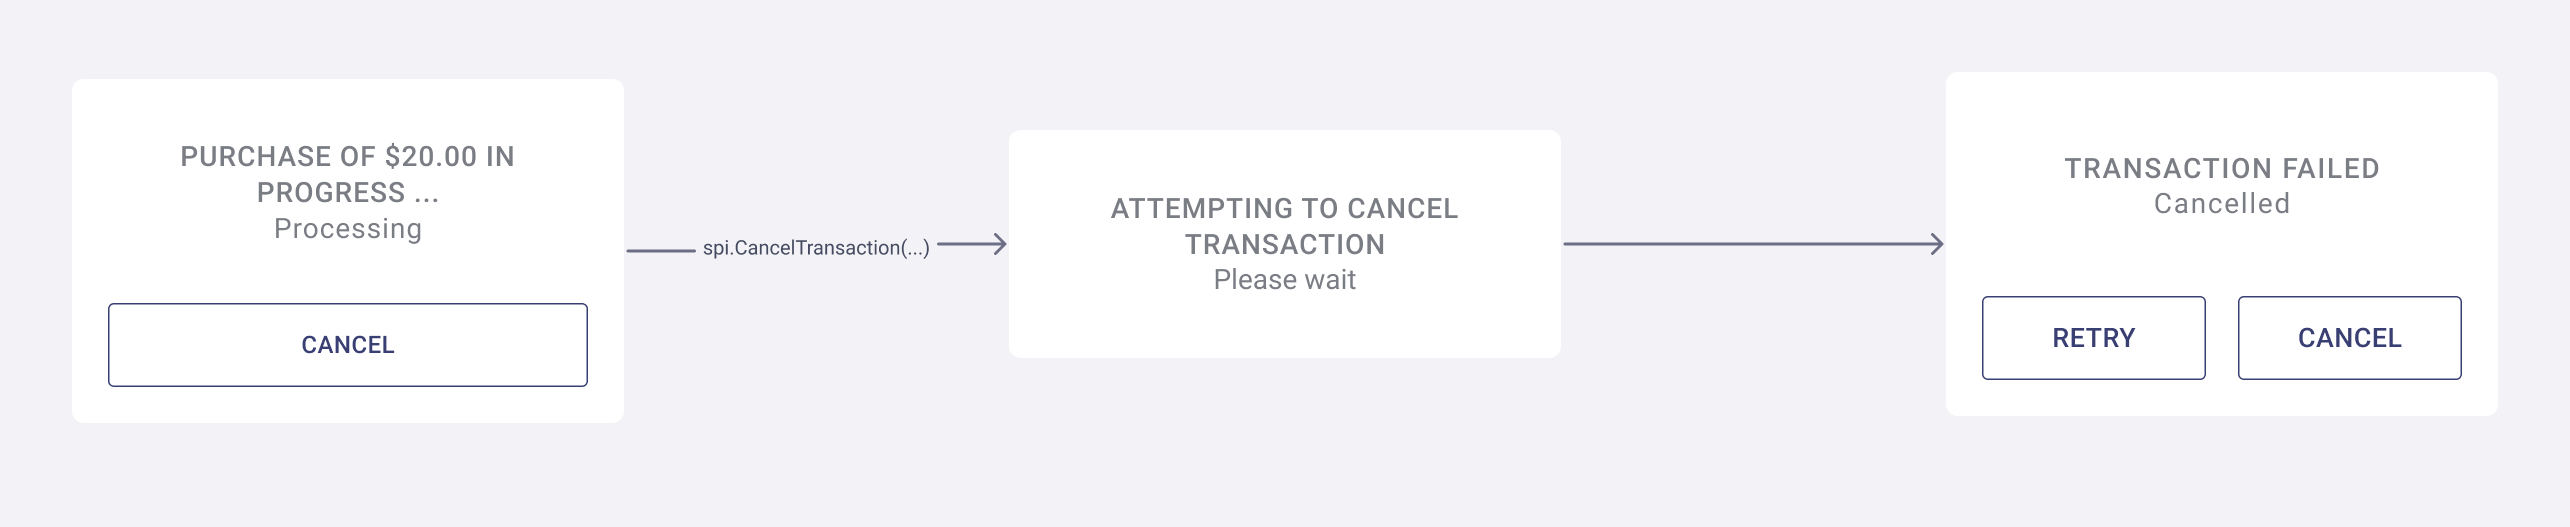 A flow diagram of the UI screens needed for cancelling a transaction.